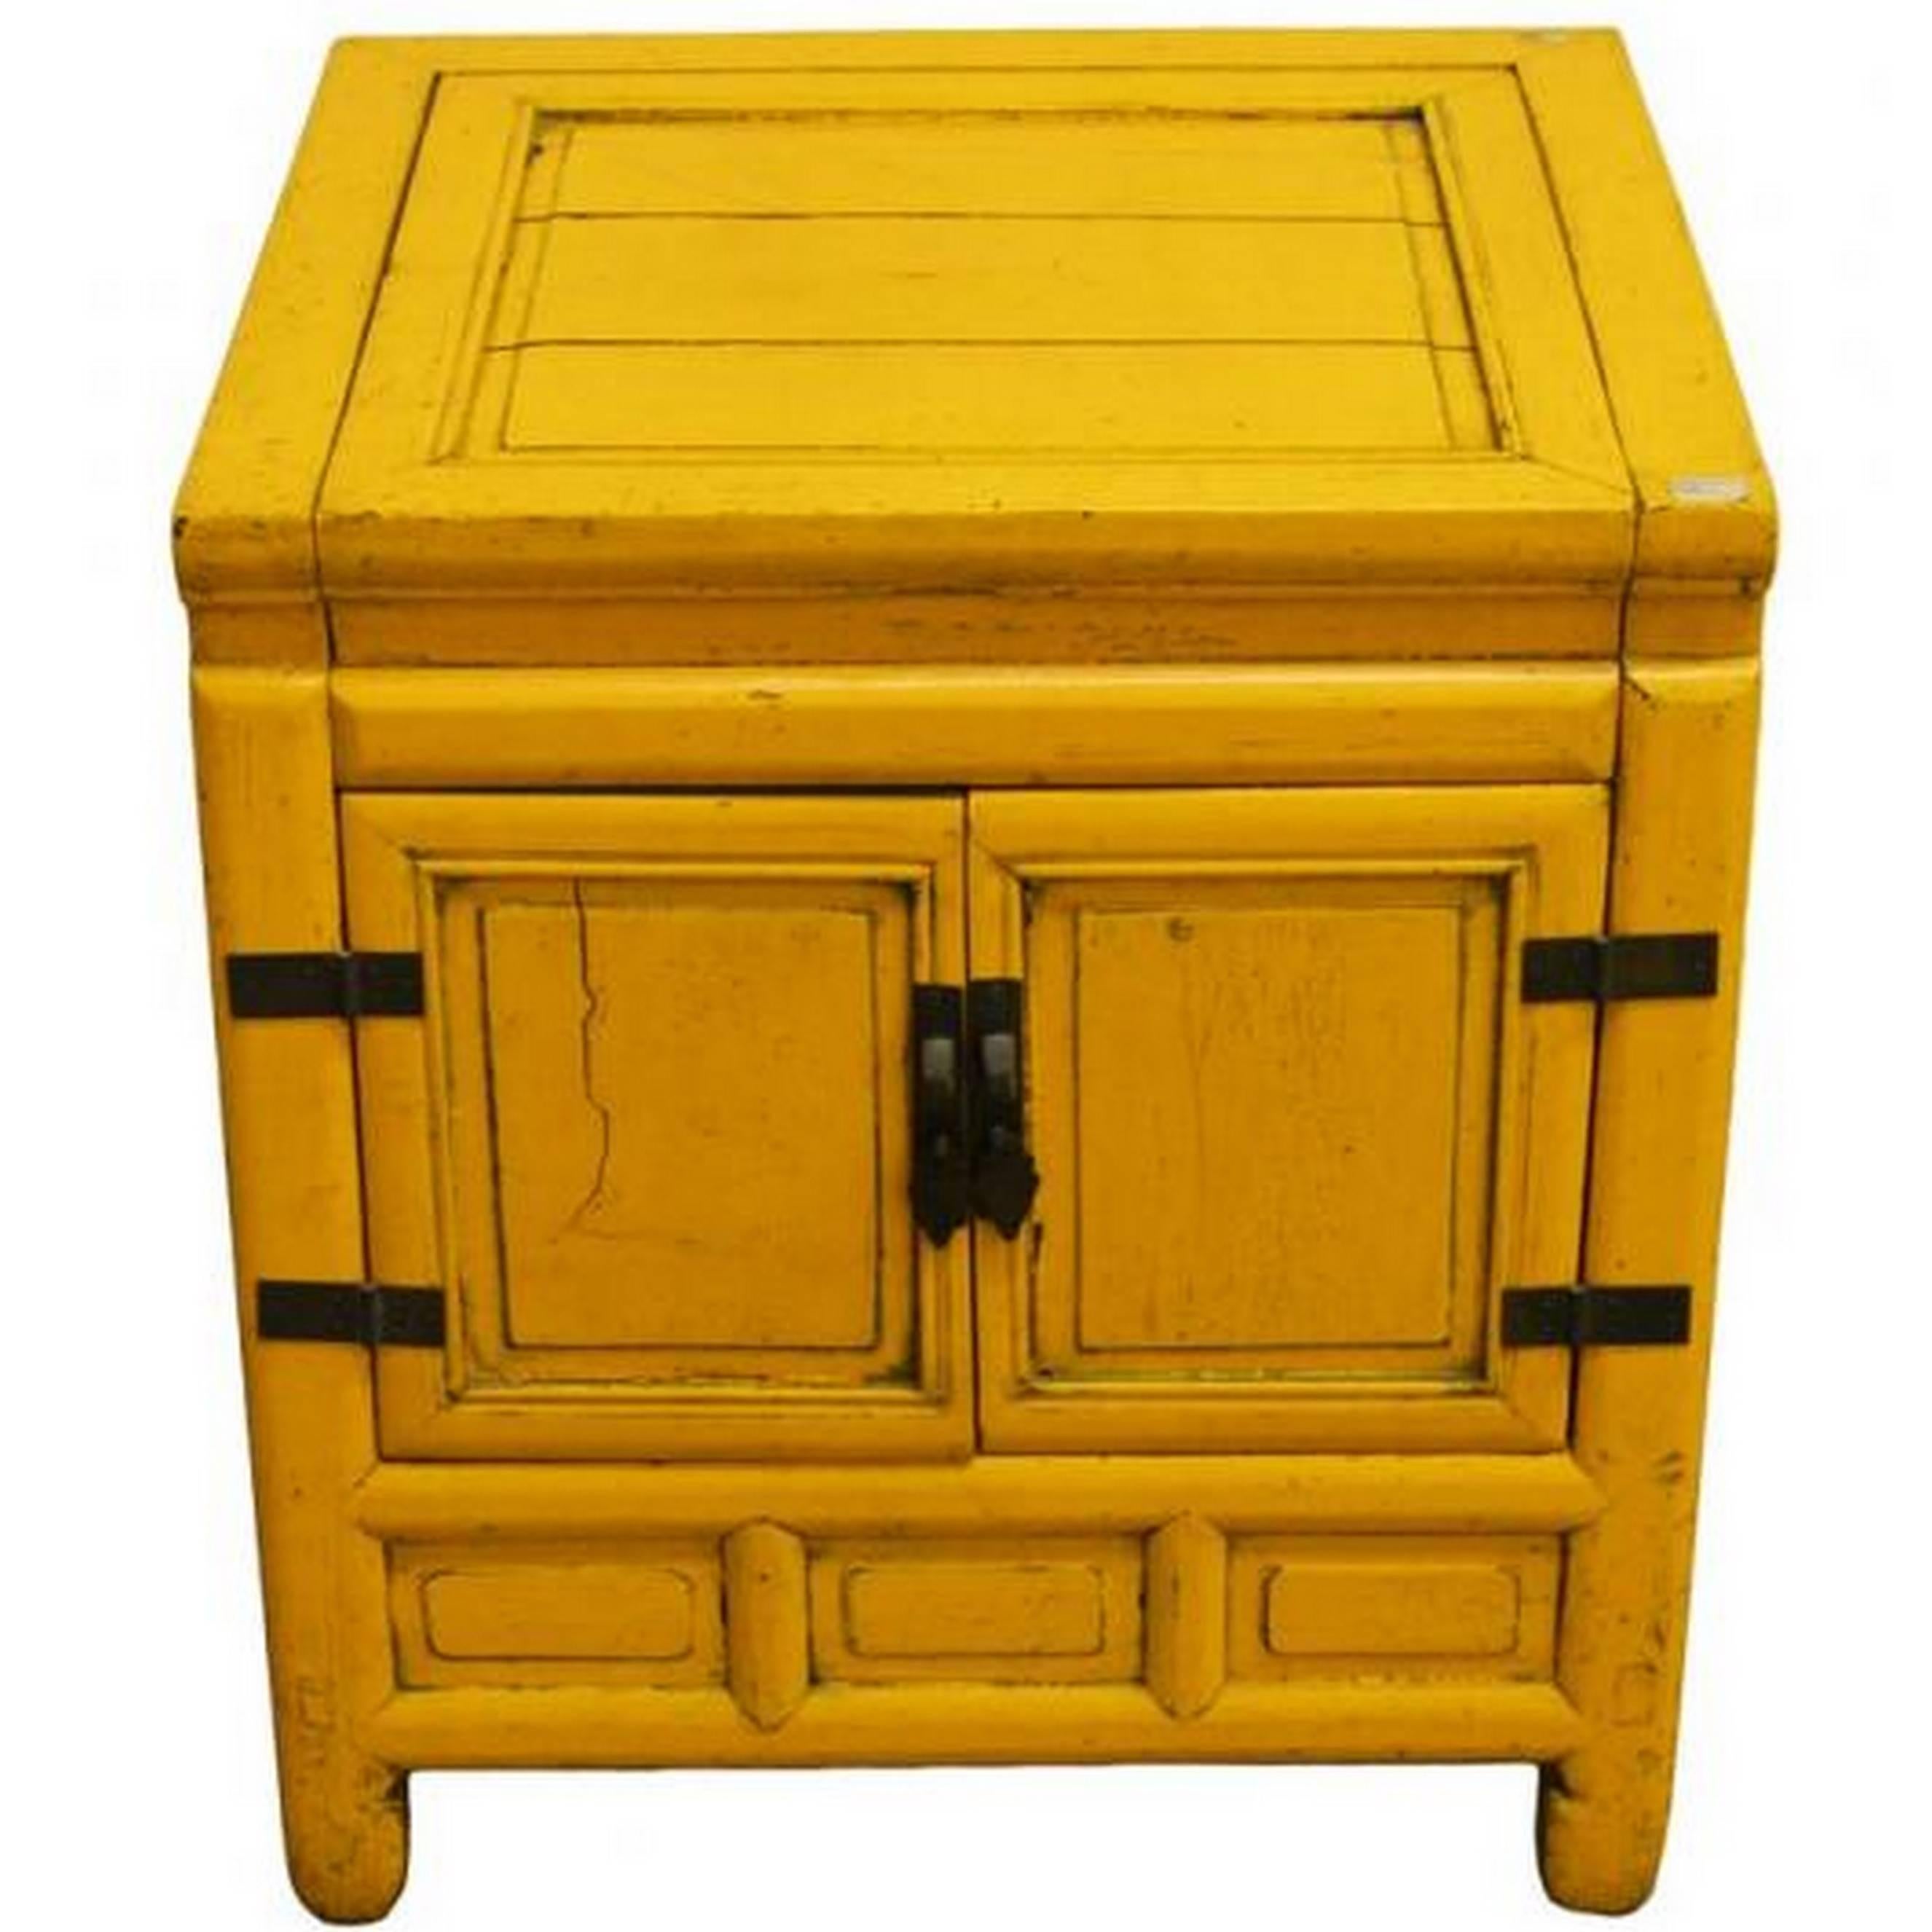 19th Century Chinese Yellow Lacquer Cabinet with Brass Hardware and Hinged Top